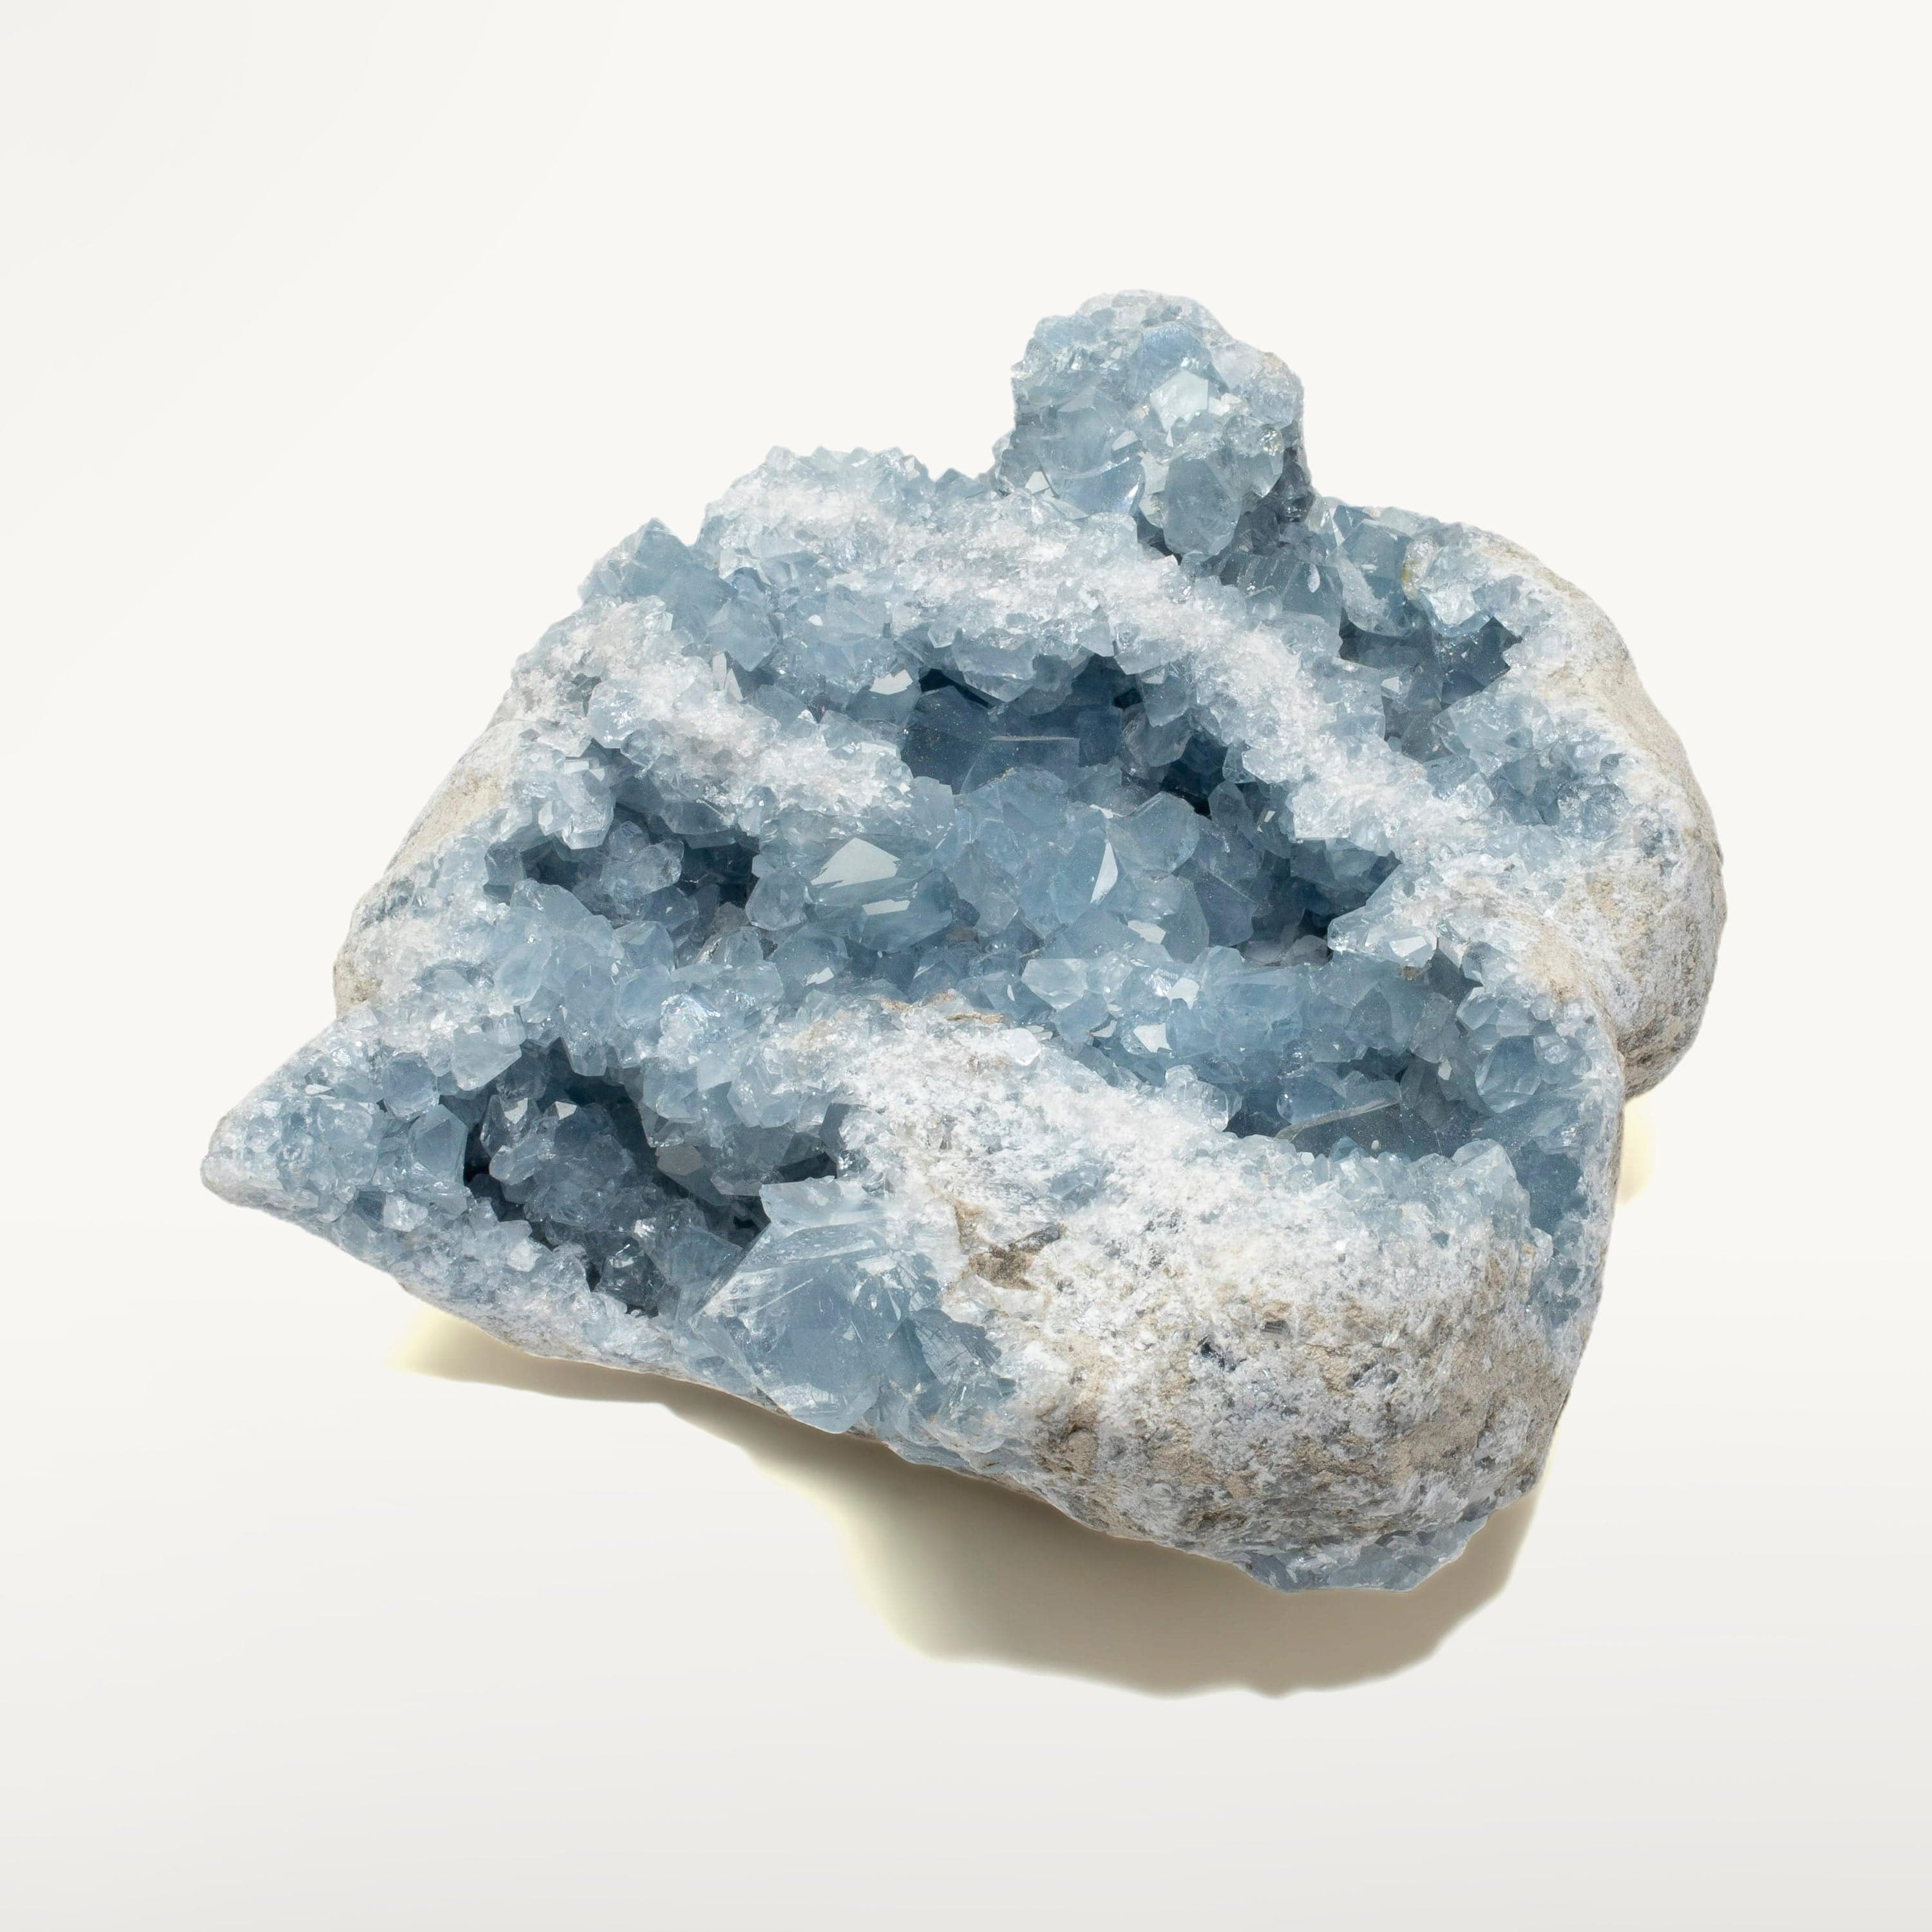 Kalifano Celestite Natural Celestite Crystal Cluster Geode from Madagascar - 8 in. CG2200.001